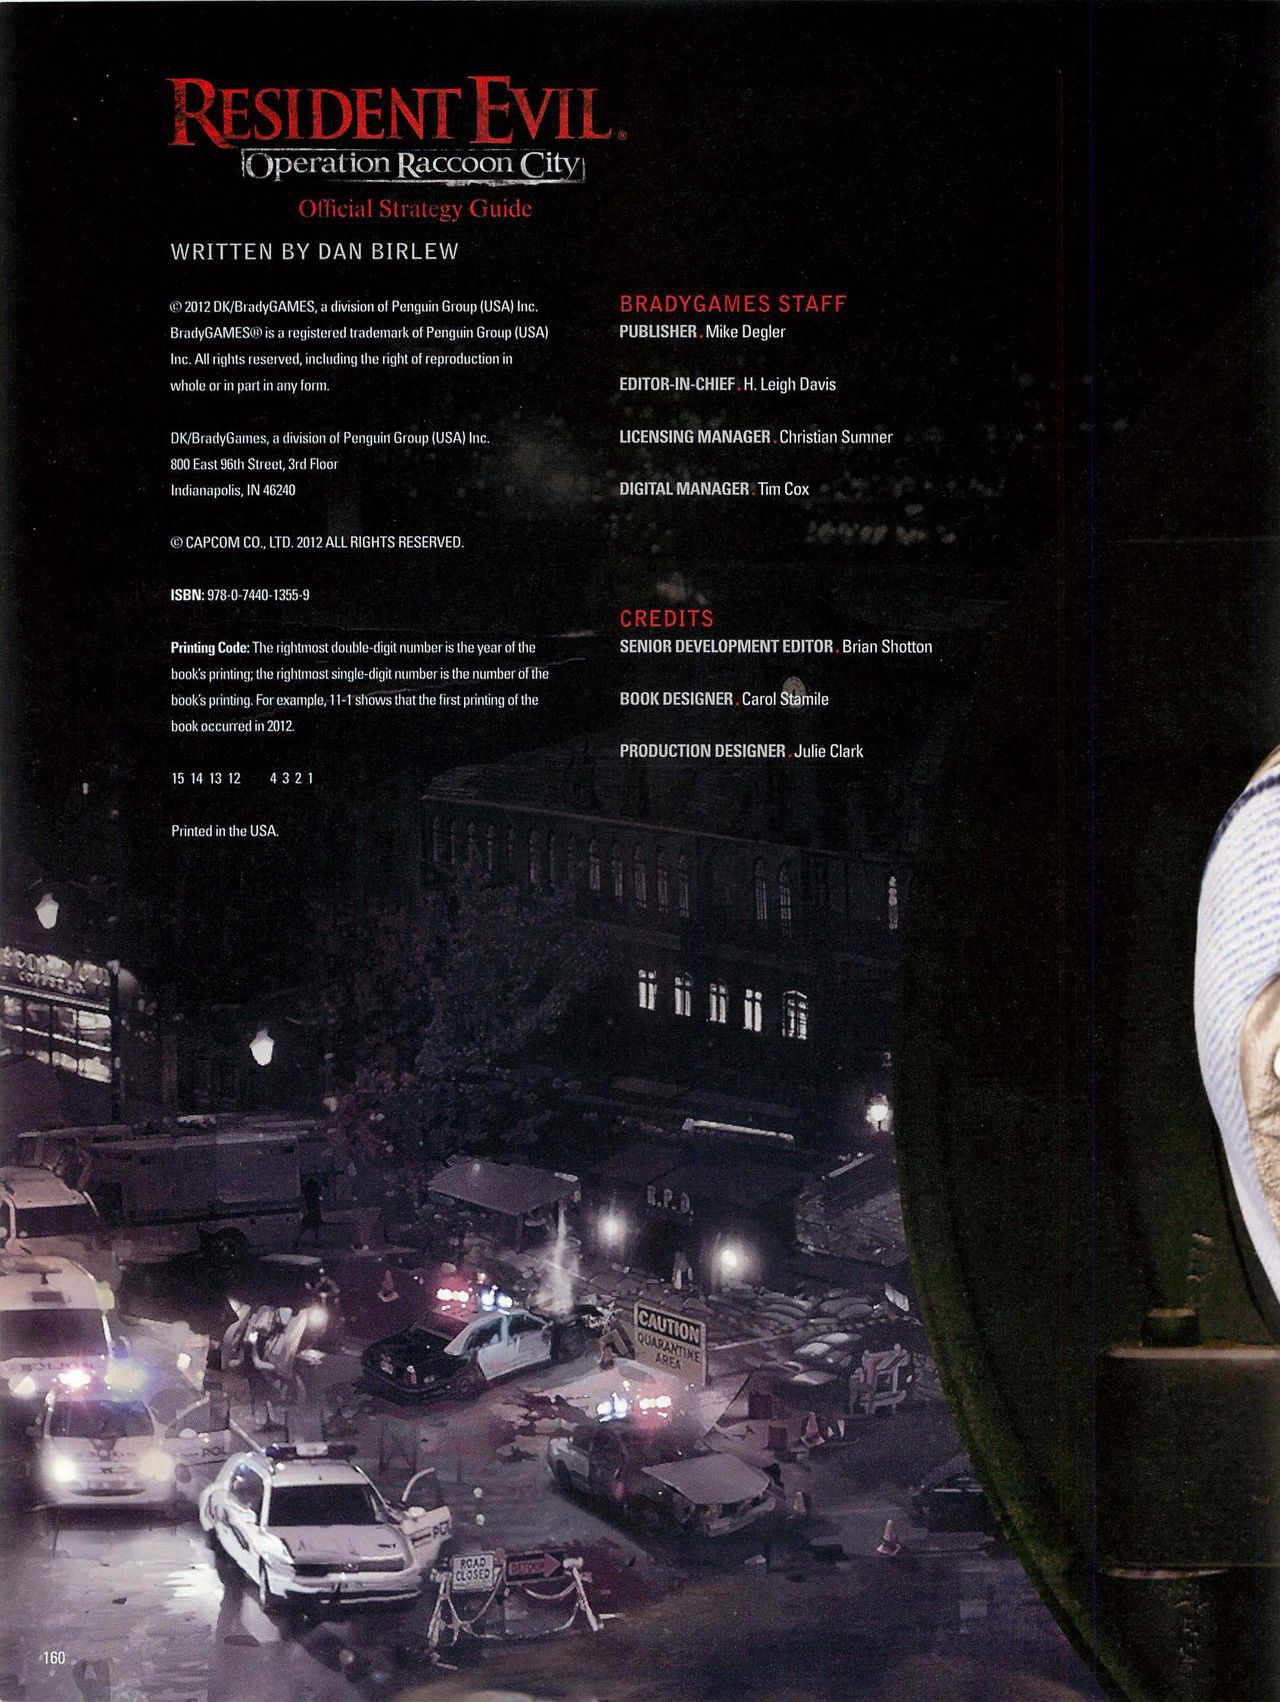 Resident Evil: Operation Raccoon City Official Strategy Guide (watermarked) 162